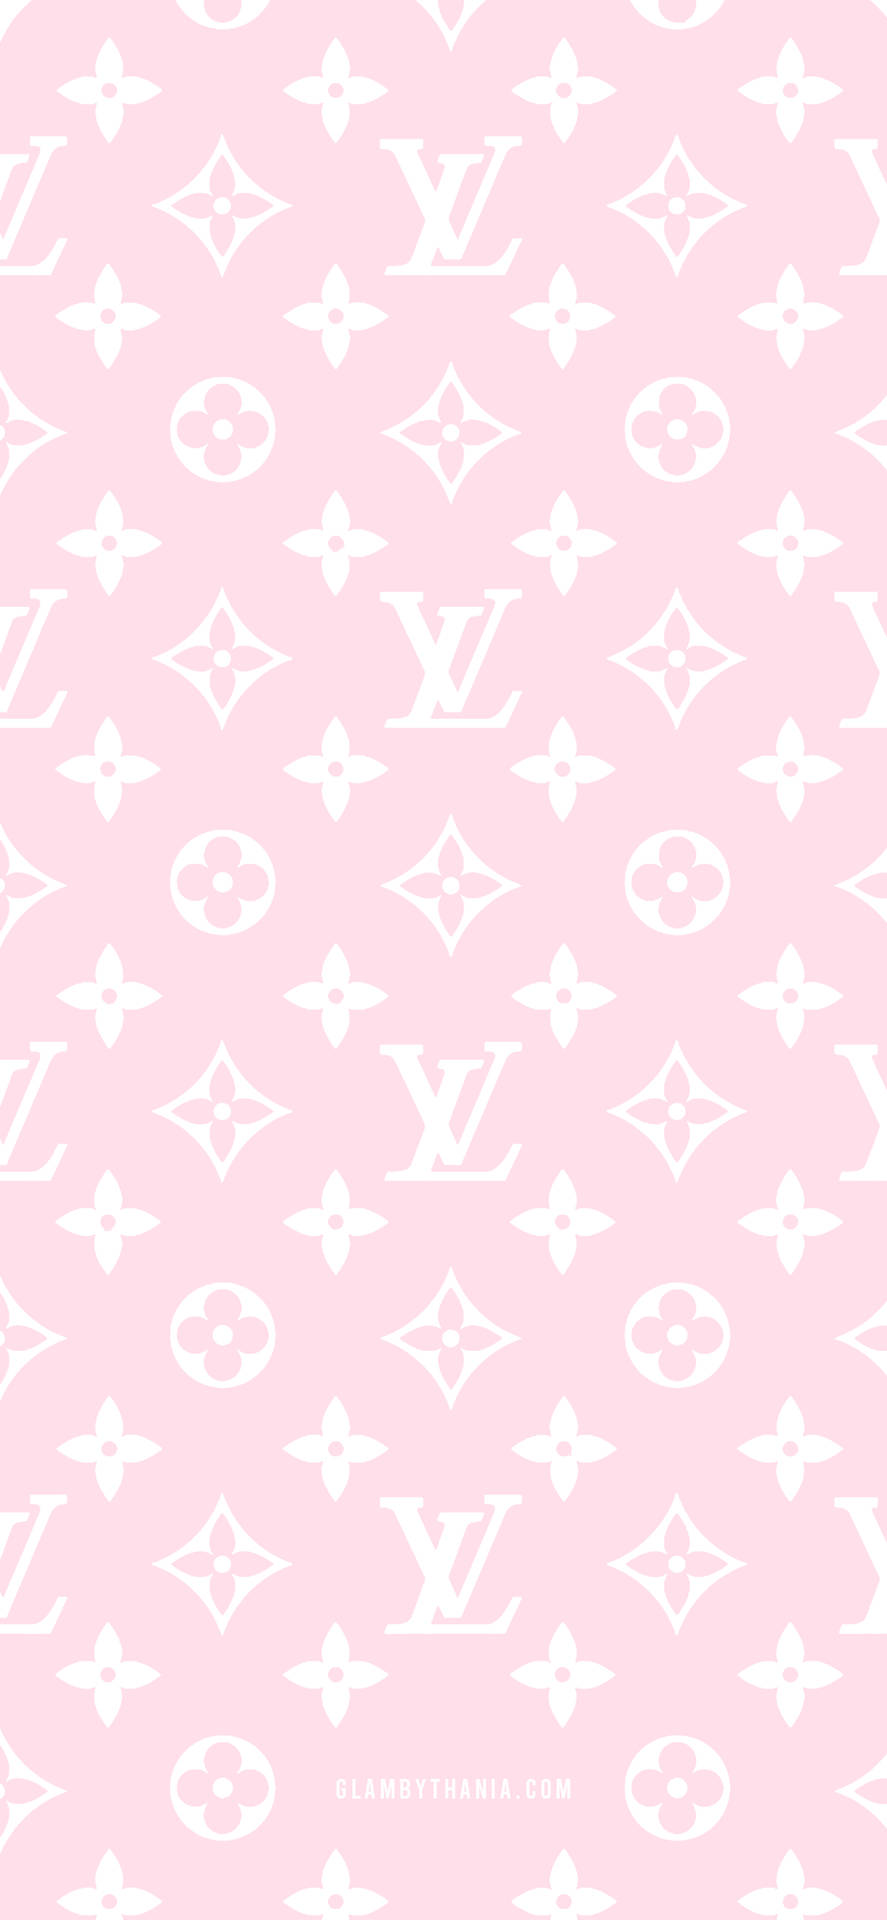 Louis Vuitton Girly Iphone Background